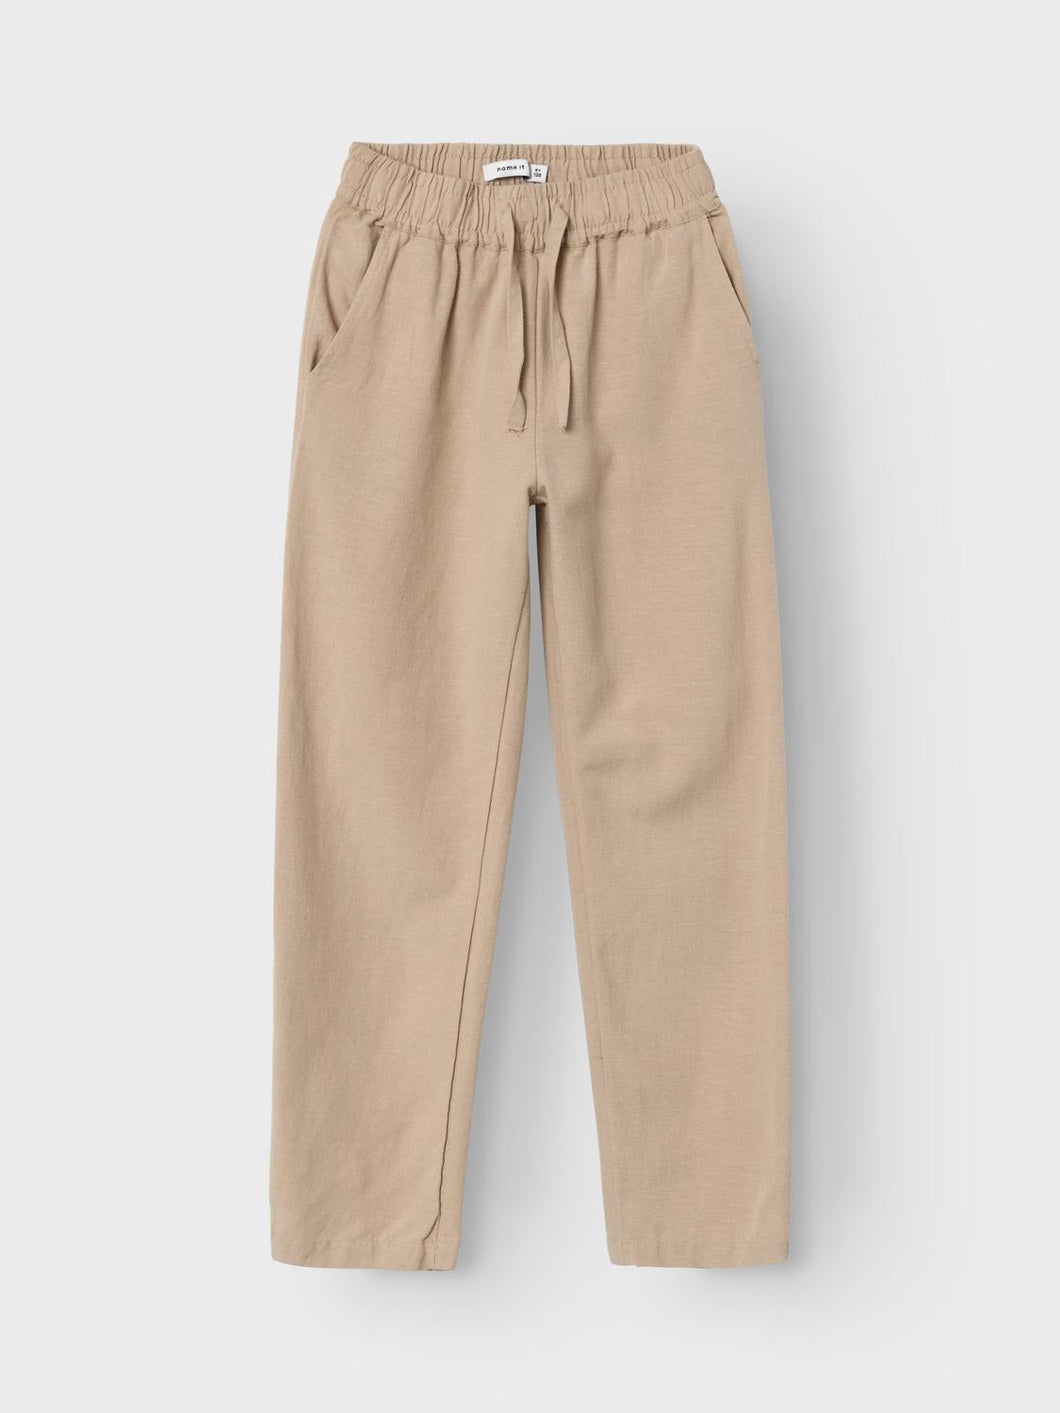 NKMFAHER Trousers - Humus